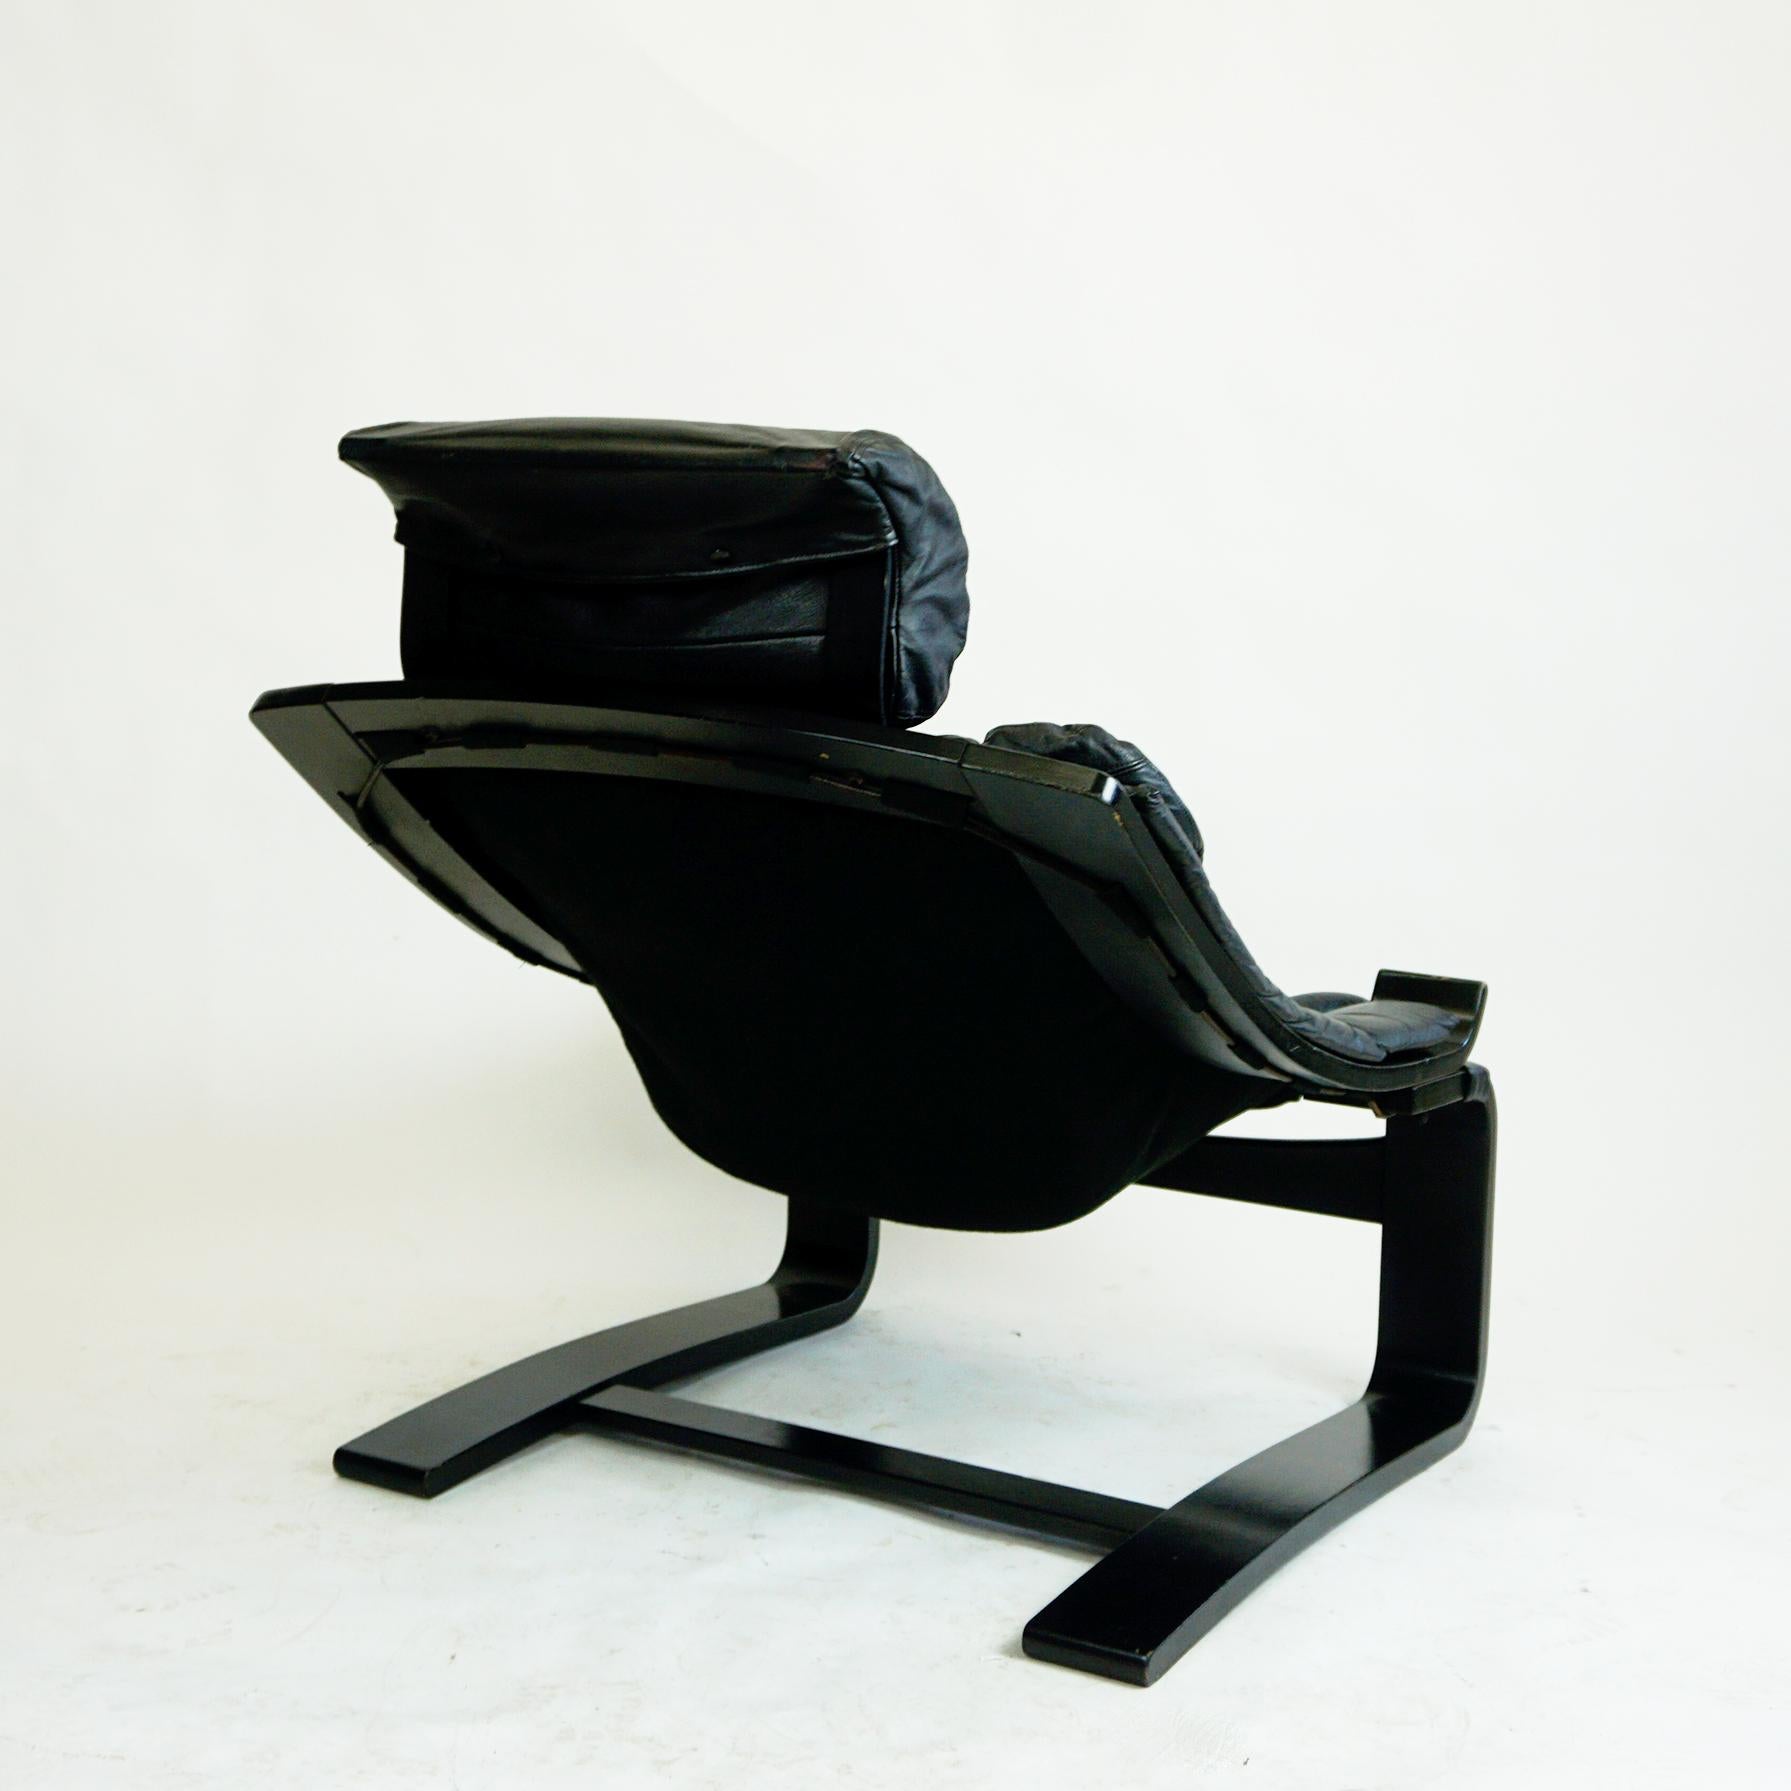 Lacquered Scandinavian Black Leather Kroken Lounge Chair by Ake Fribytter for Nelo Sweden